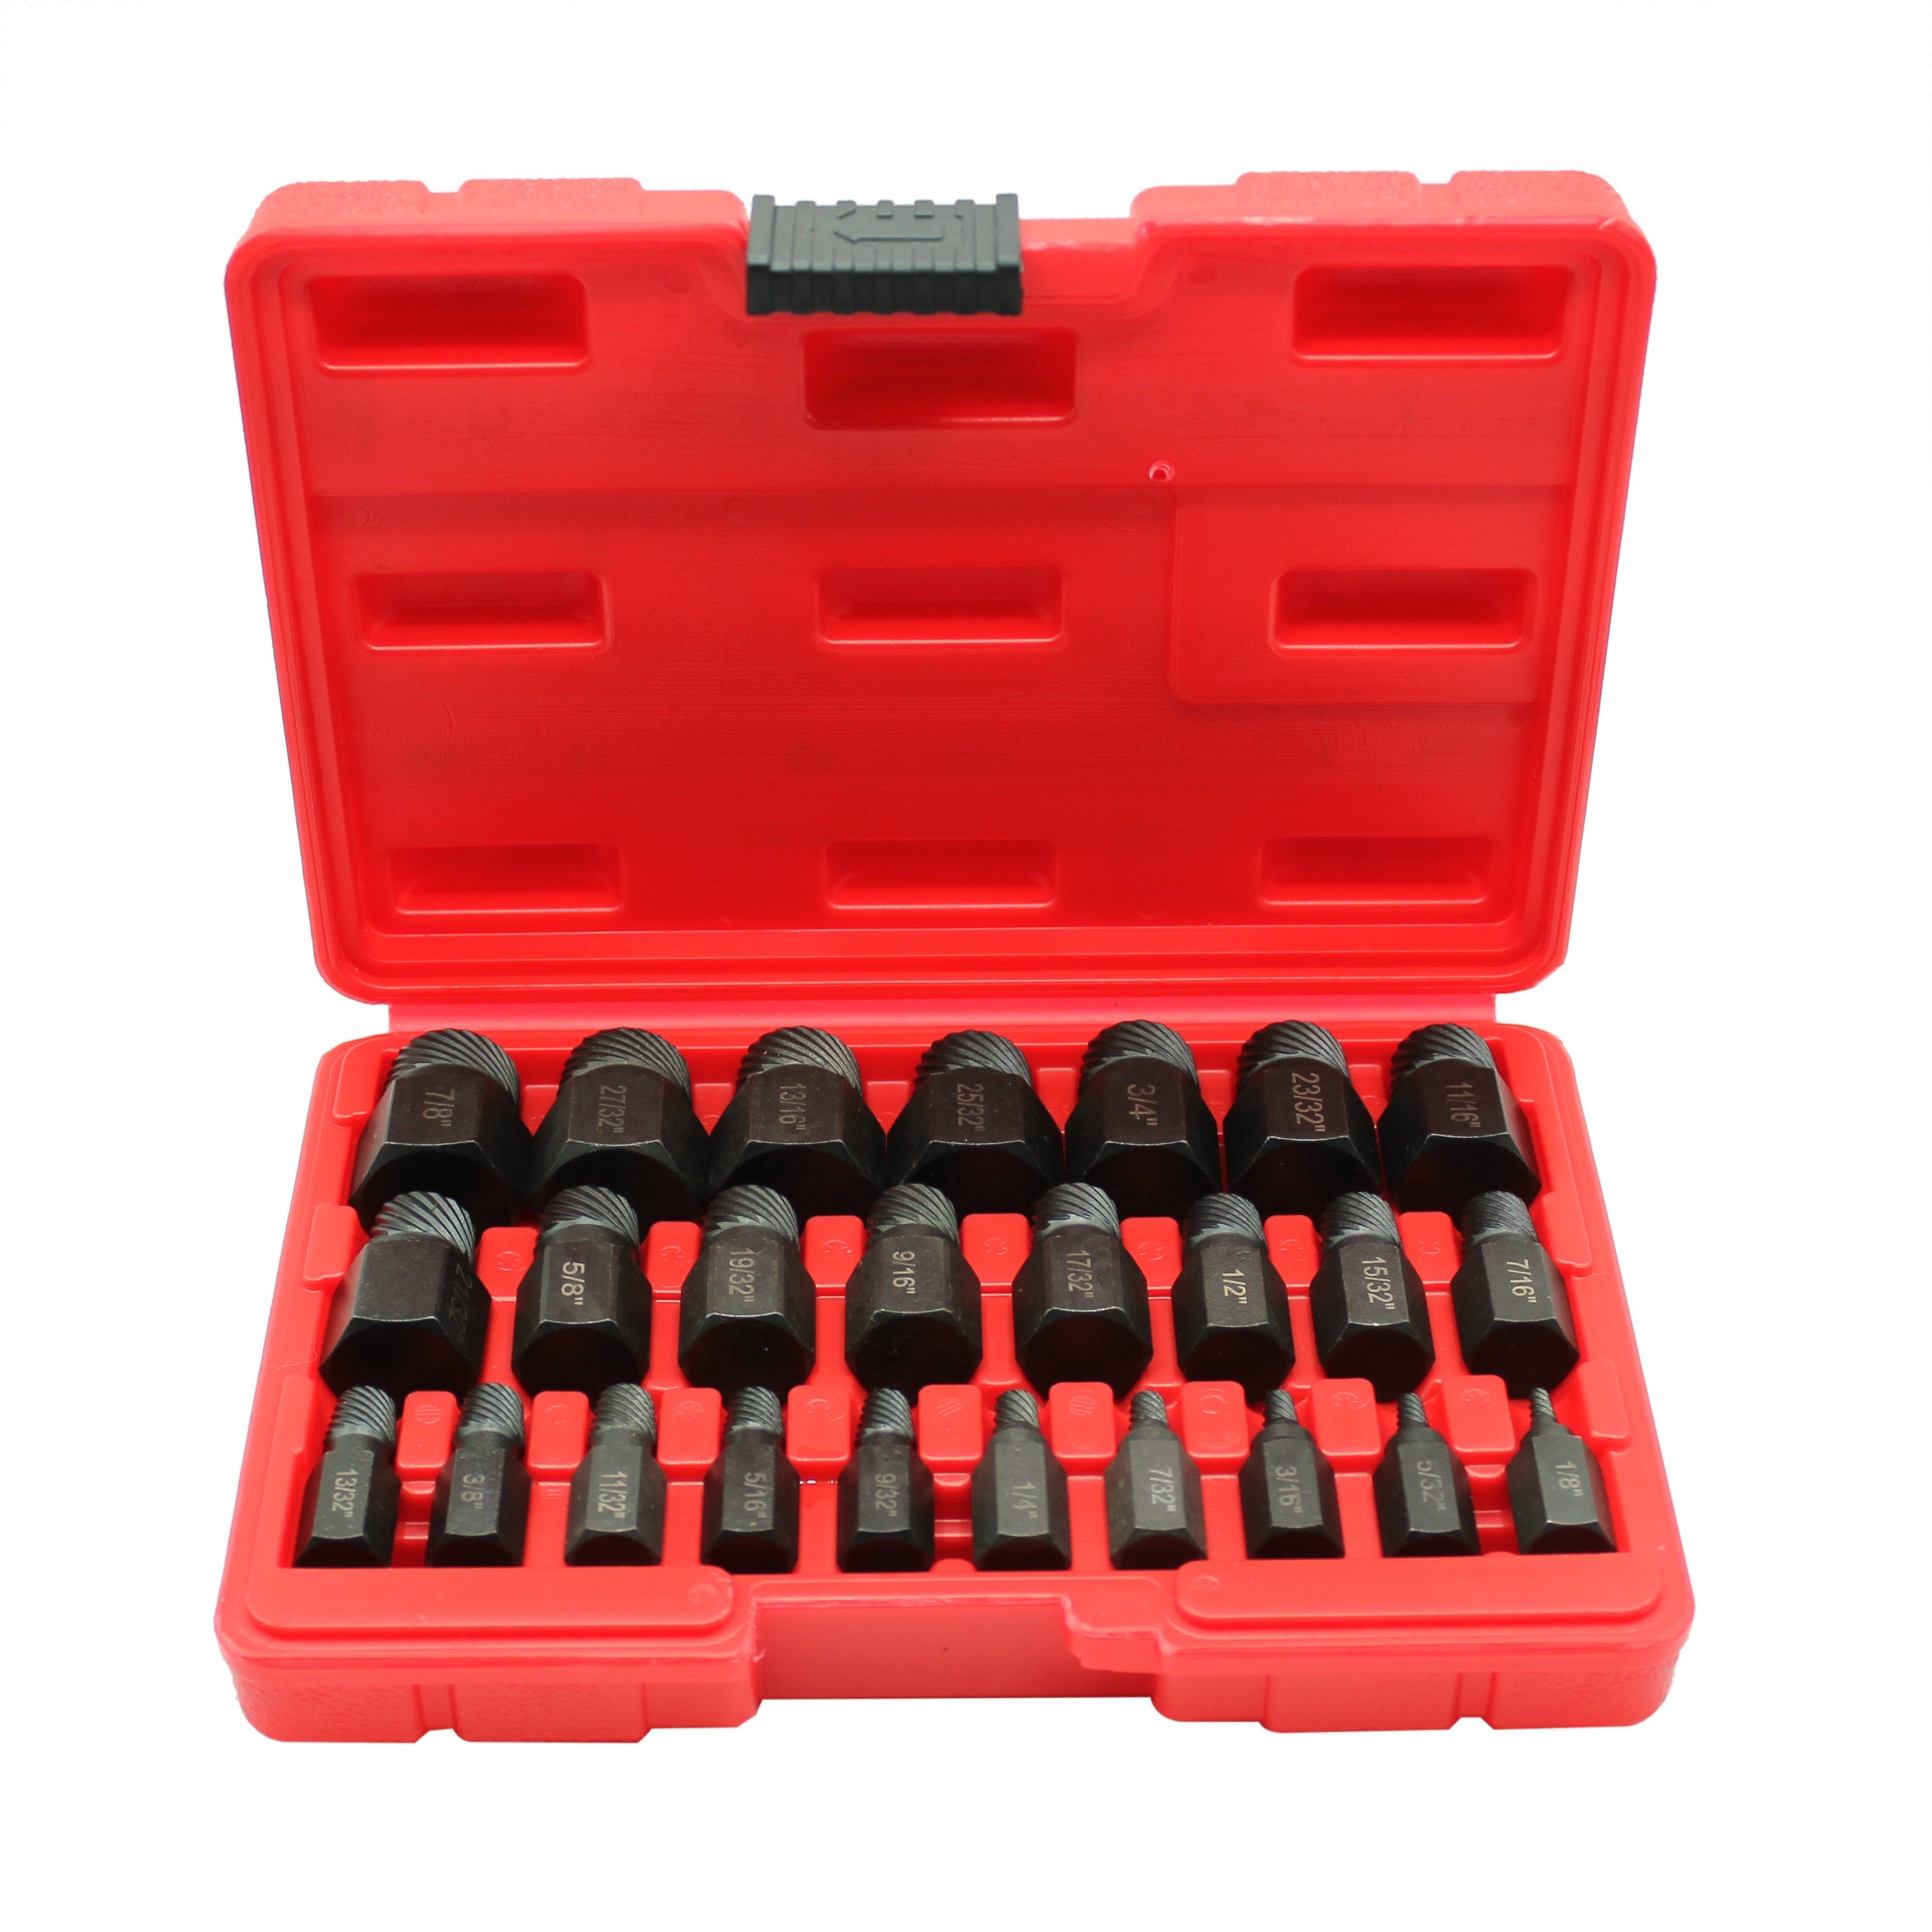 

25pcs Screw Extractor Set, Easy Pull Out Bolt Extractor Set, Hex-head Multi-spline Screw Set For Stripped Broken Rounded Bolts, Screws, Studs